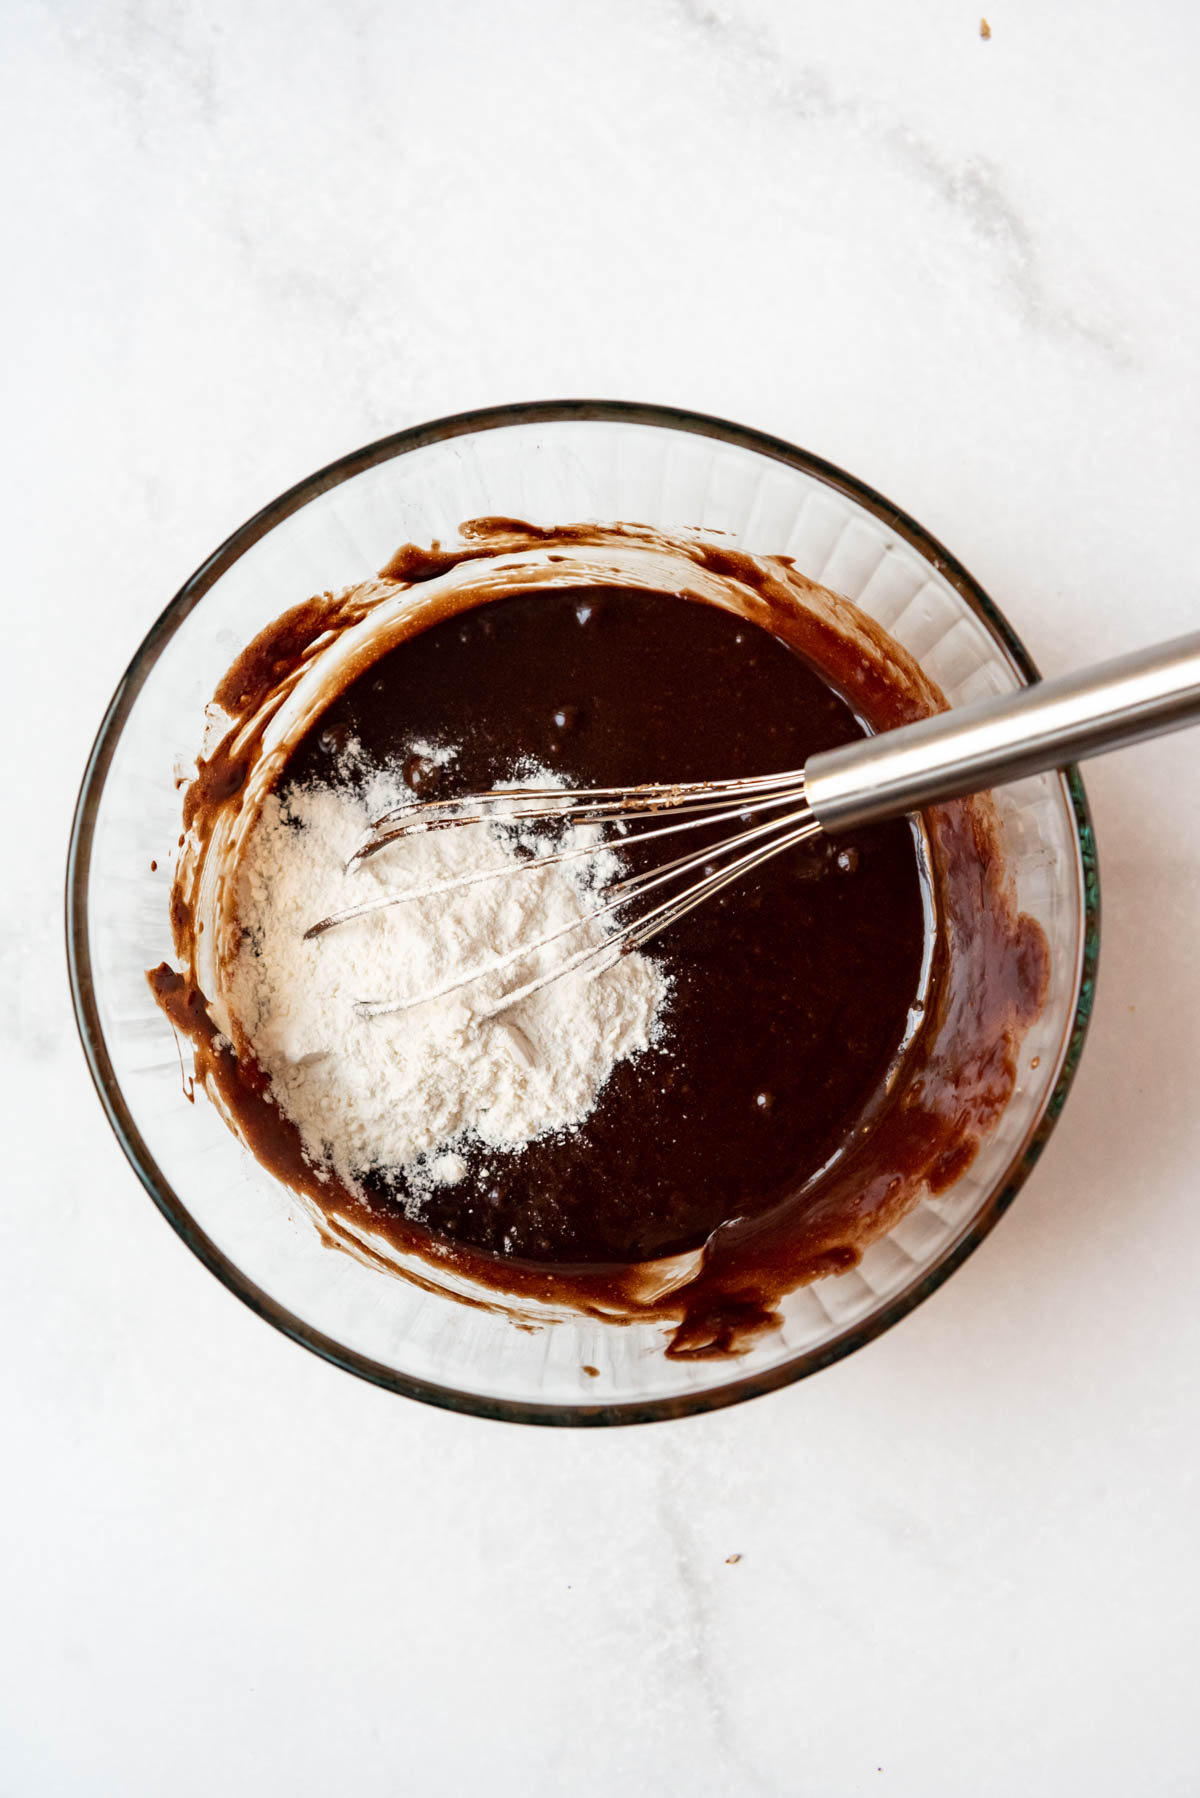 Whisking flour into chocolate batter in a glass bowl.